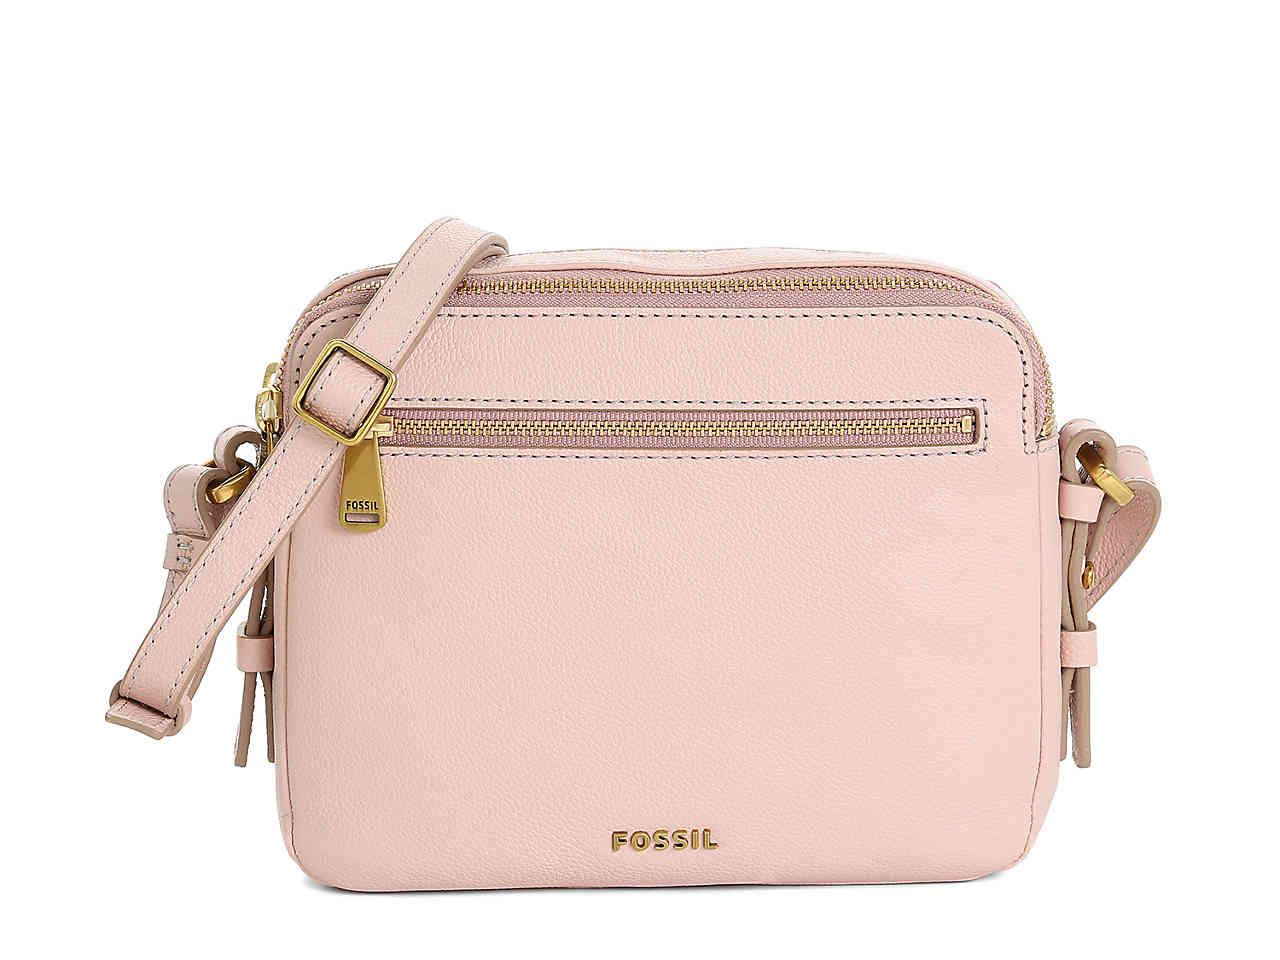 Fossil Piper Leather Crossbody Bag in Light Pink (Pink) - Lyst